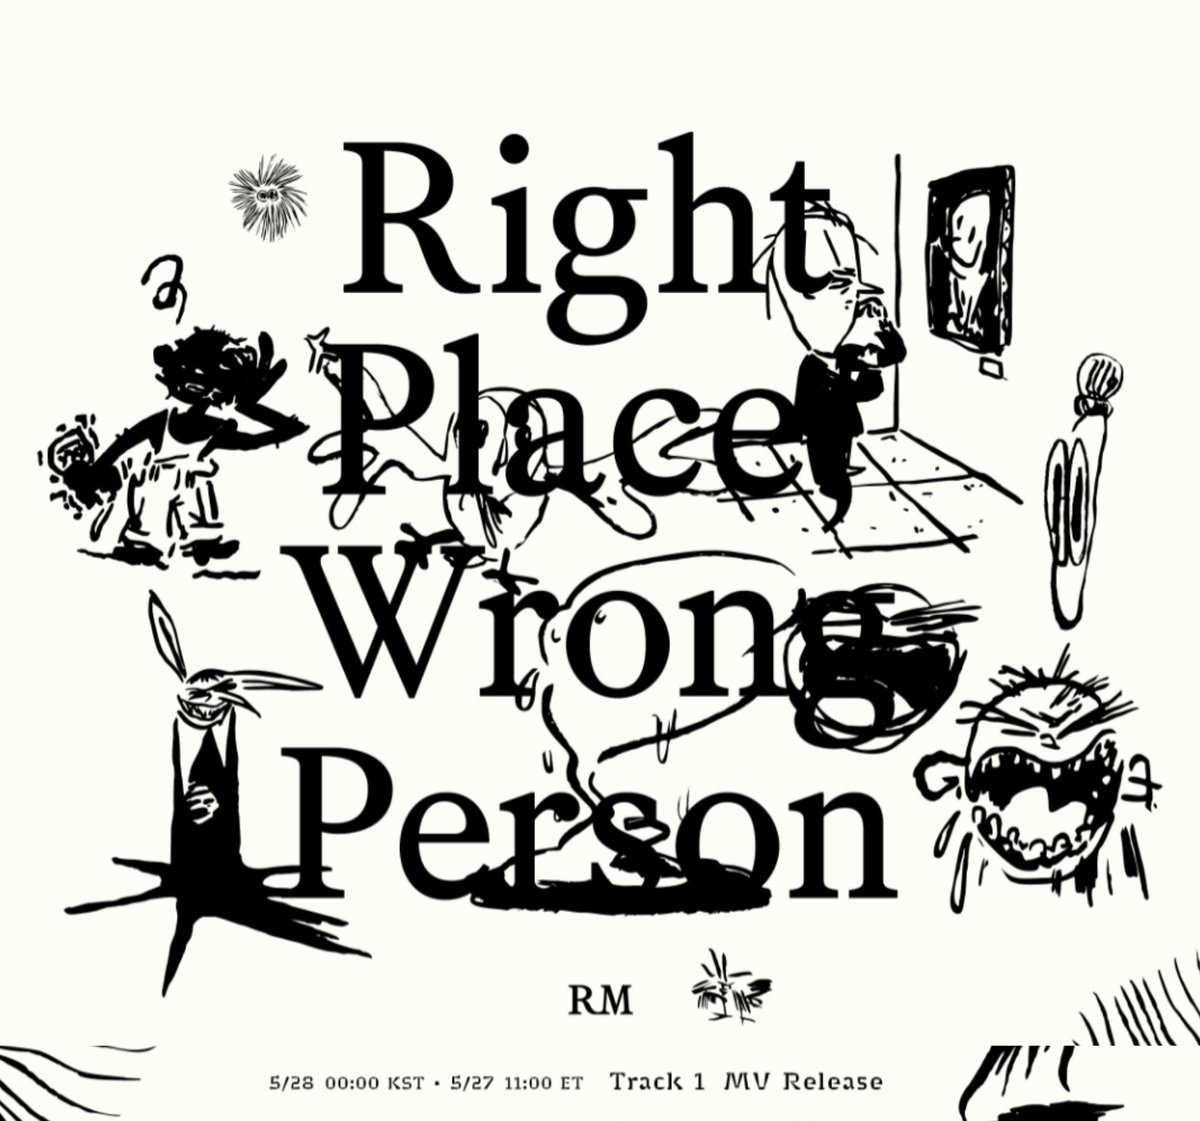 📌 Track 1 MV Release 🗓️ MAY 28 ⏰ 12AM KST RIGHT PEOPLE WRONG PLACE MV #RM #RightPlaceWrongPerson